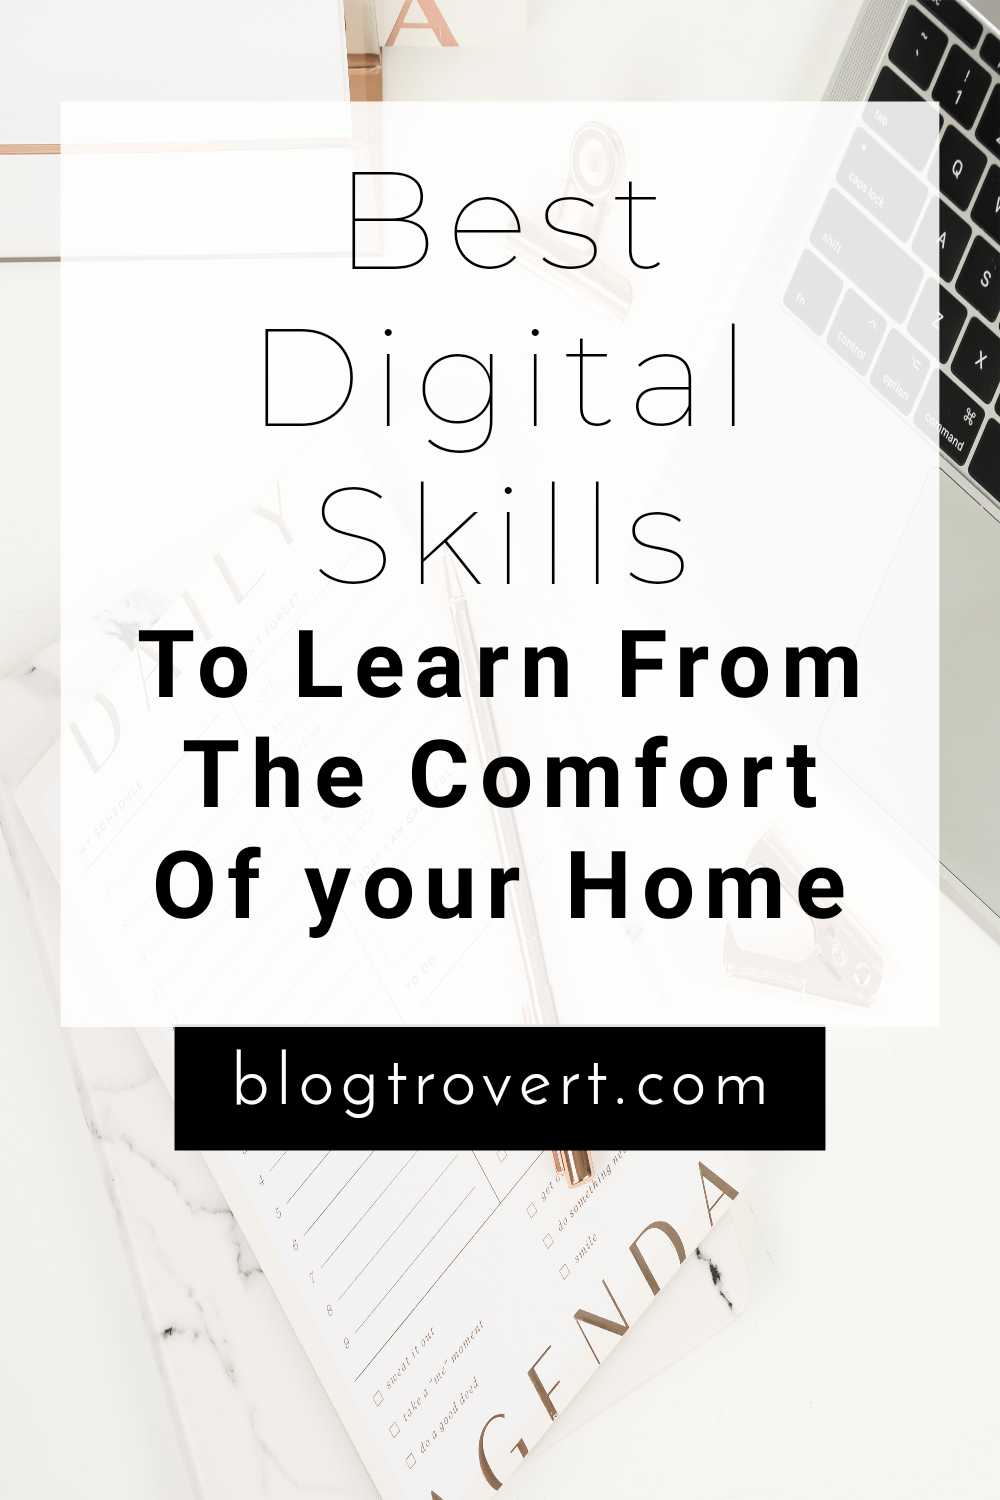 5 of the Best Digital Skills and Where to Learn Them 6